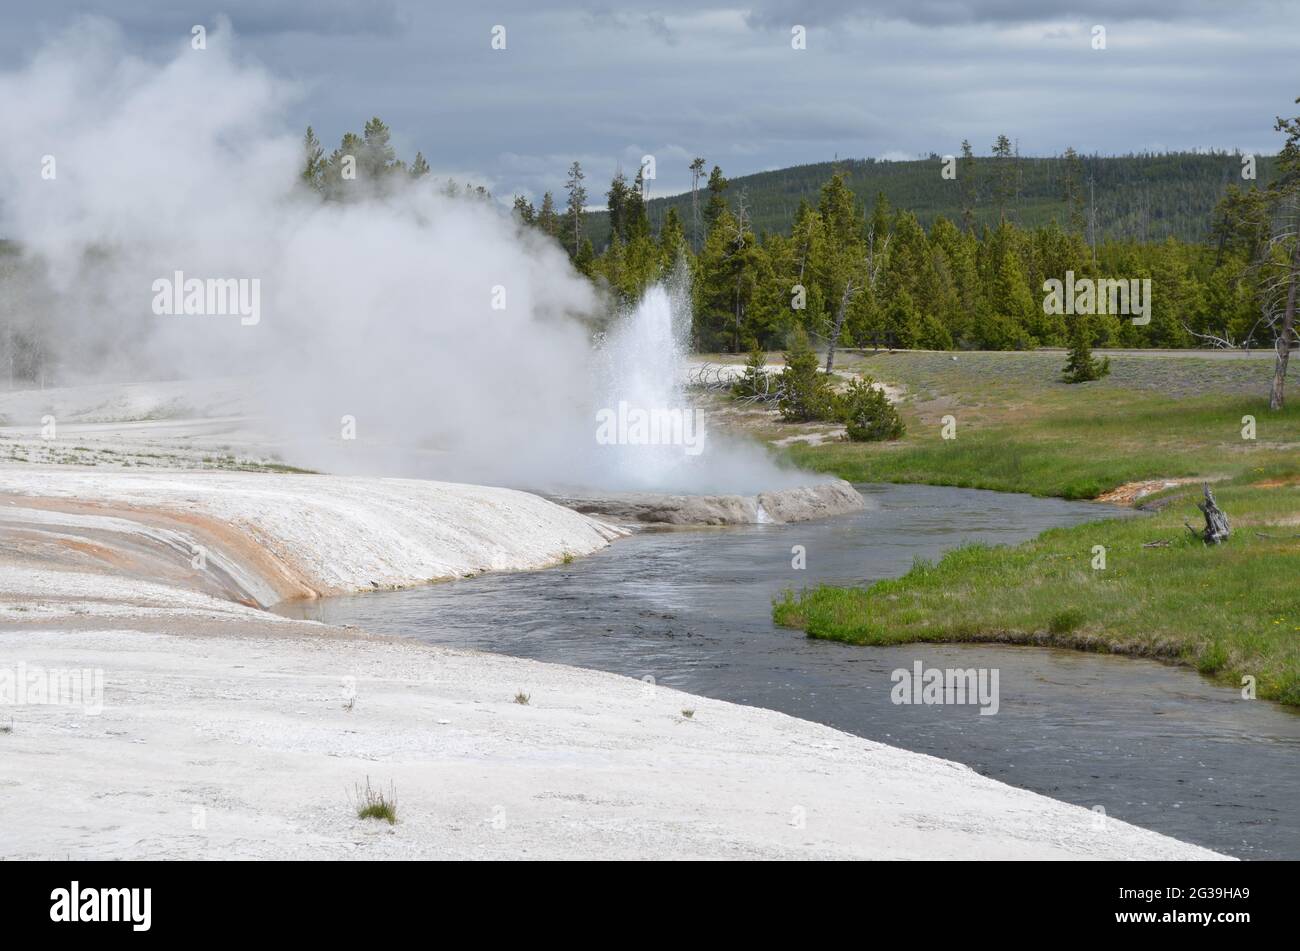 Spring in Yellowstone National Park: Iron Spring Creek Flows Past Cliff Geyser of the Emerald Group in the Black Sand Basin Area of Upper Geyser Basin Stock Photo